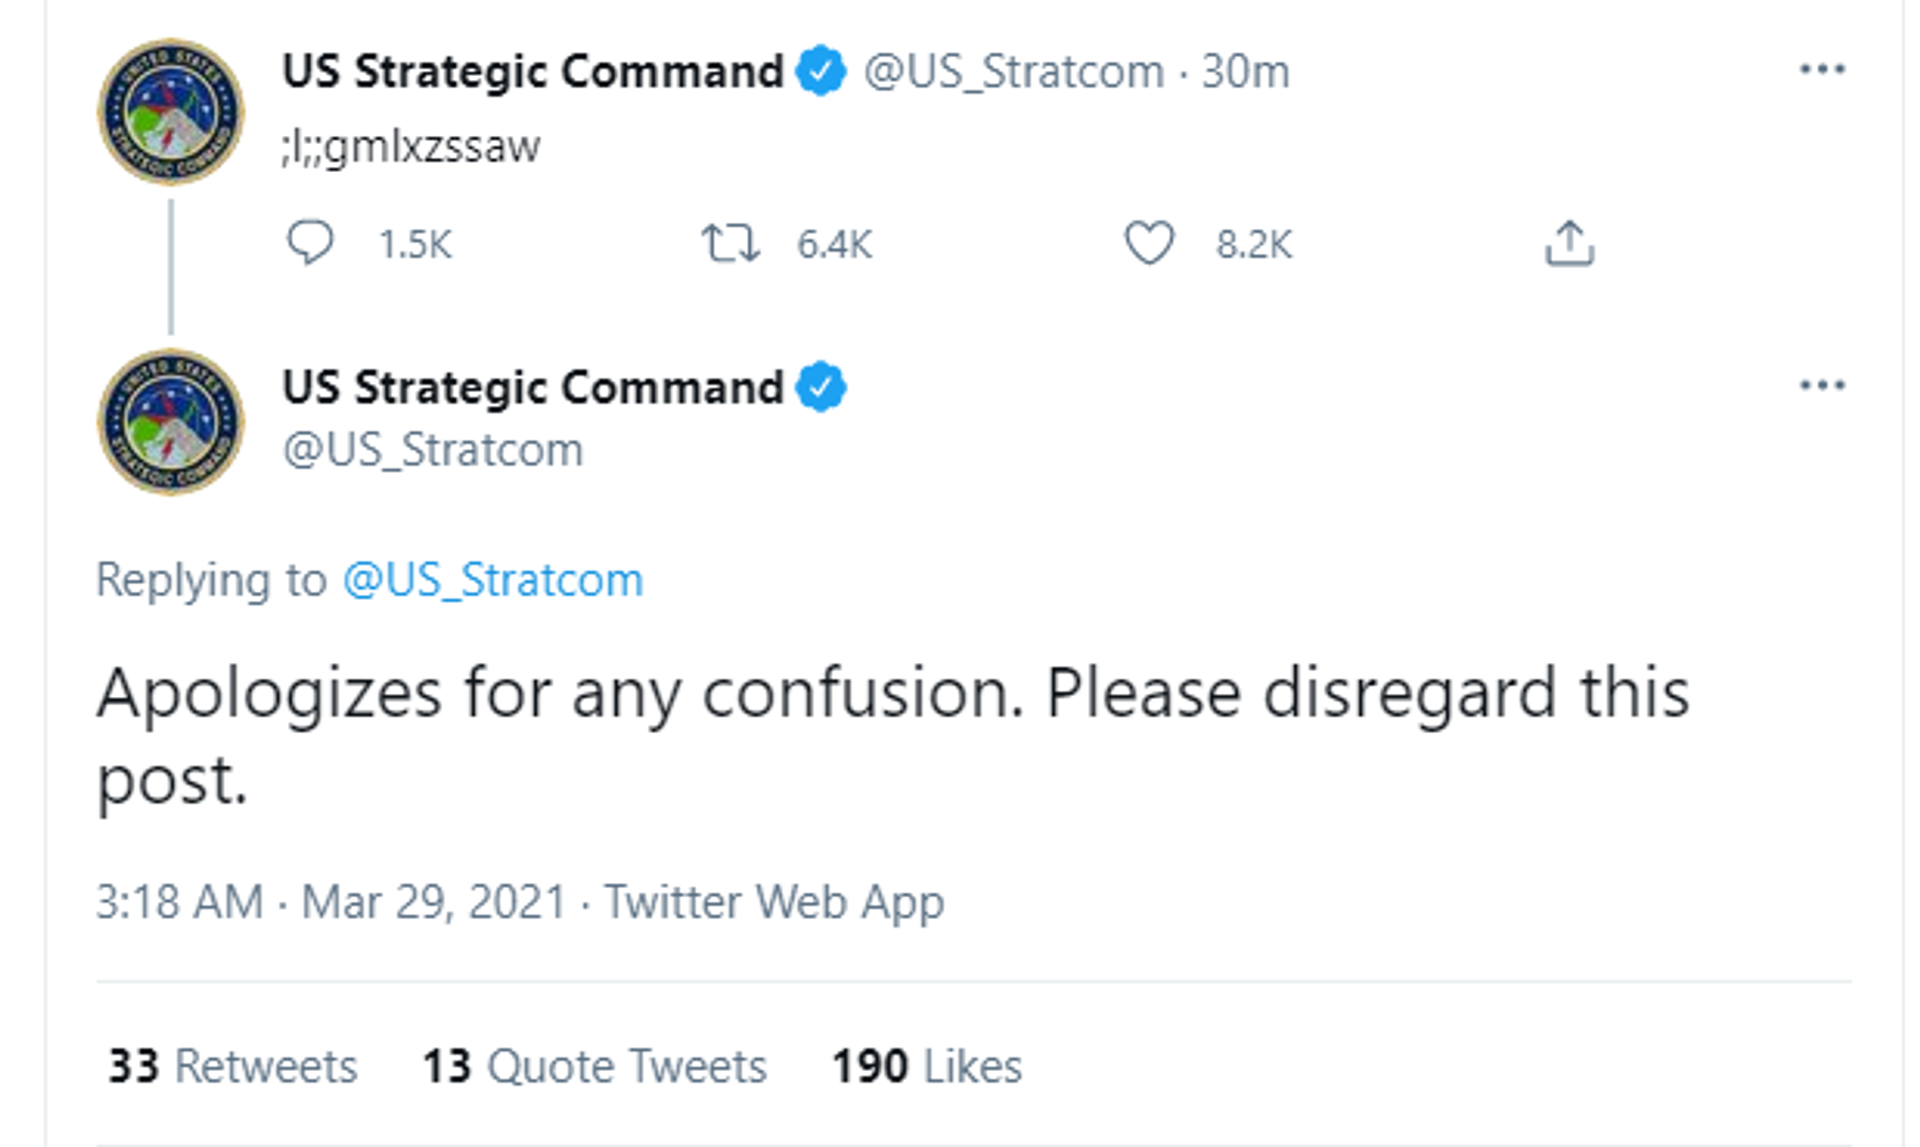 'No Launch Codes Here': US Strategic Command Offers 'Apologizes' After Posting Gibberish - Sputnik International, 1920, 29.03.2021